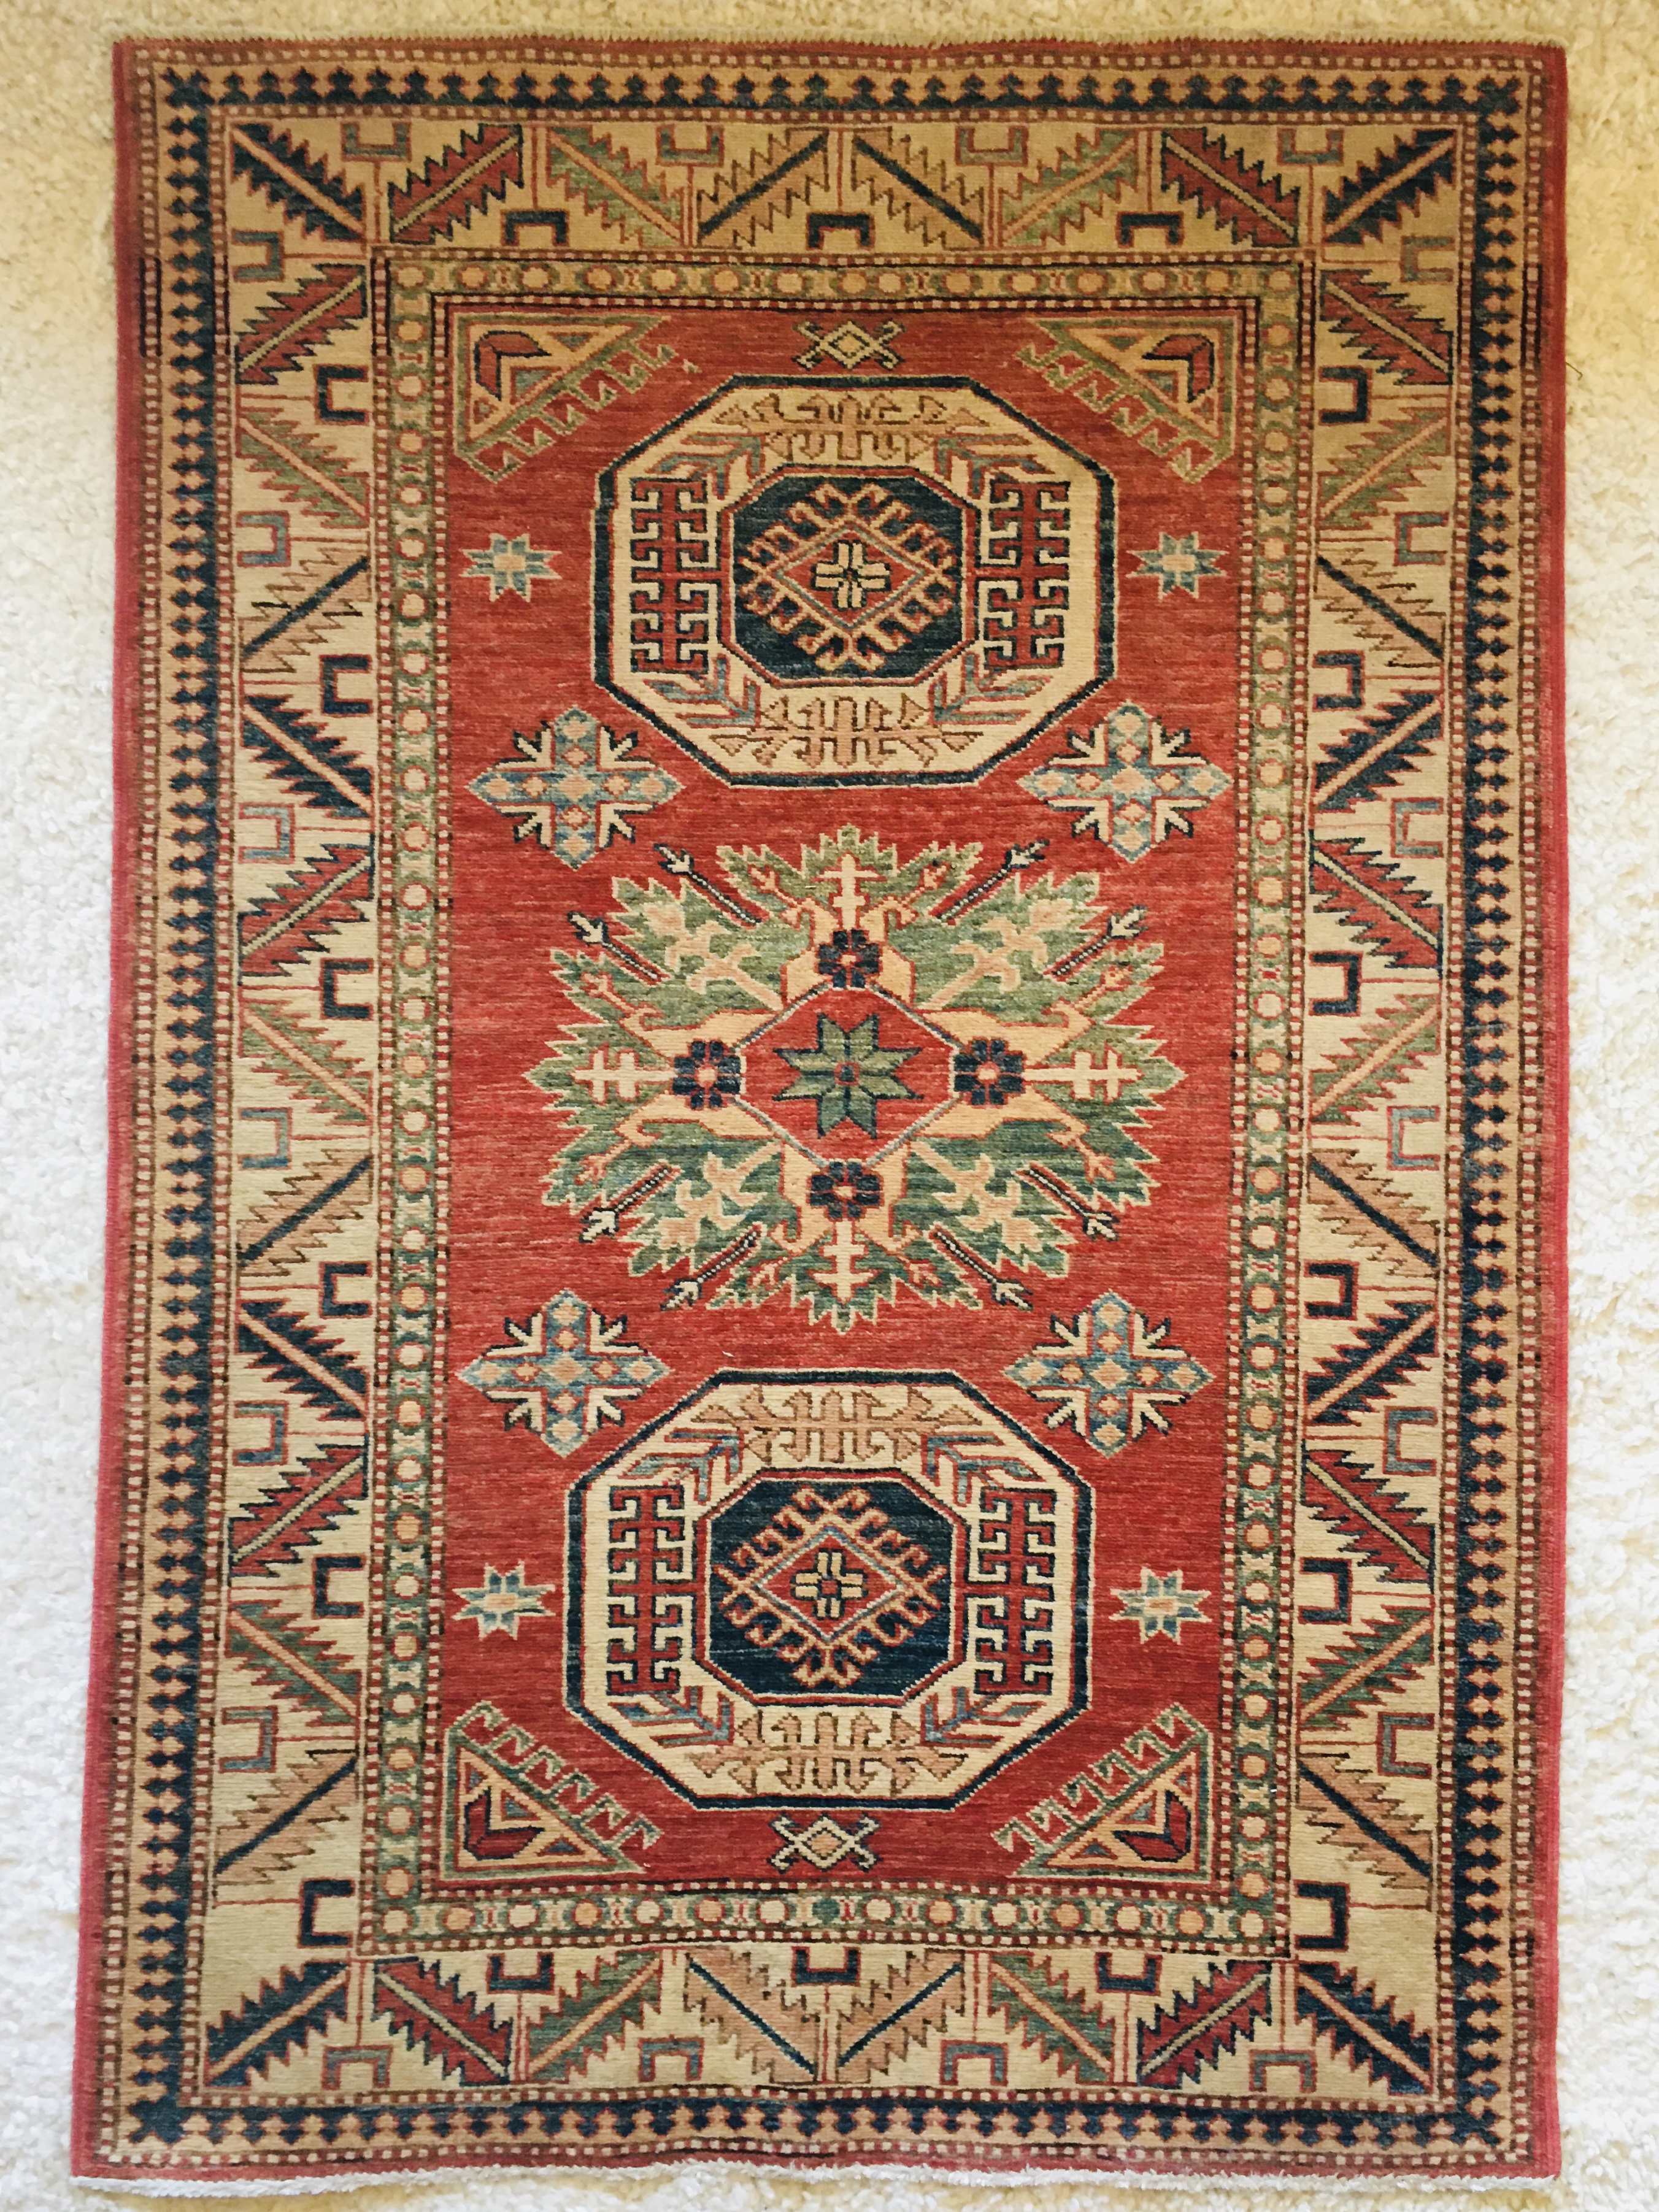 An orange and white rug with geometric and floral designs